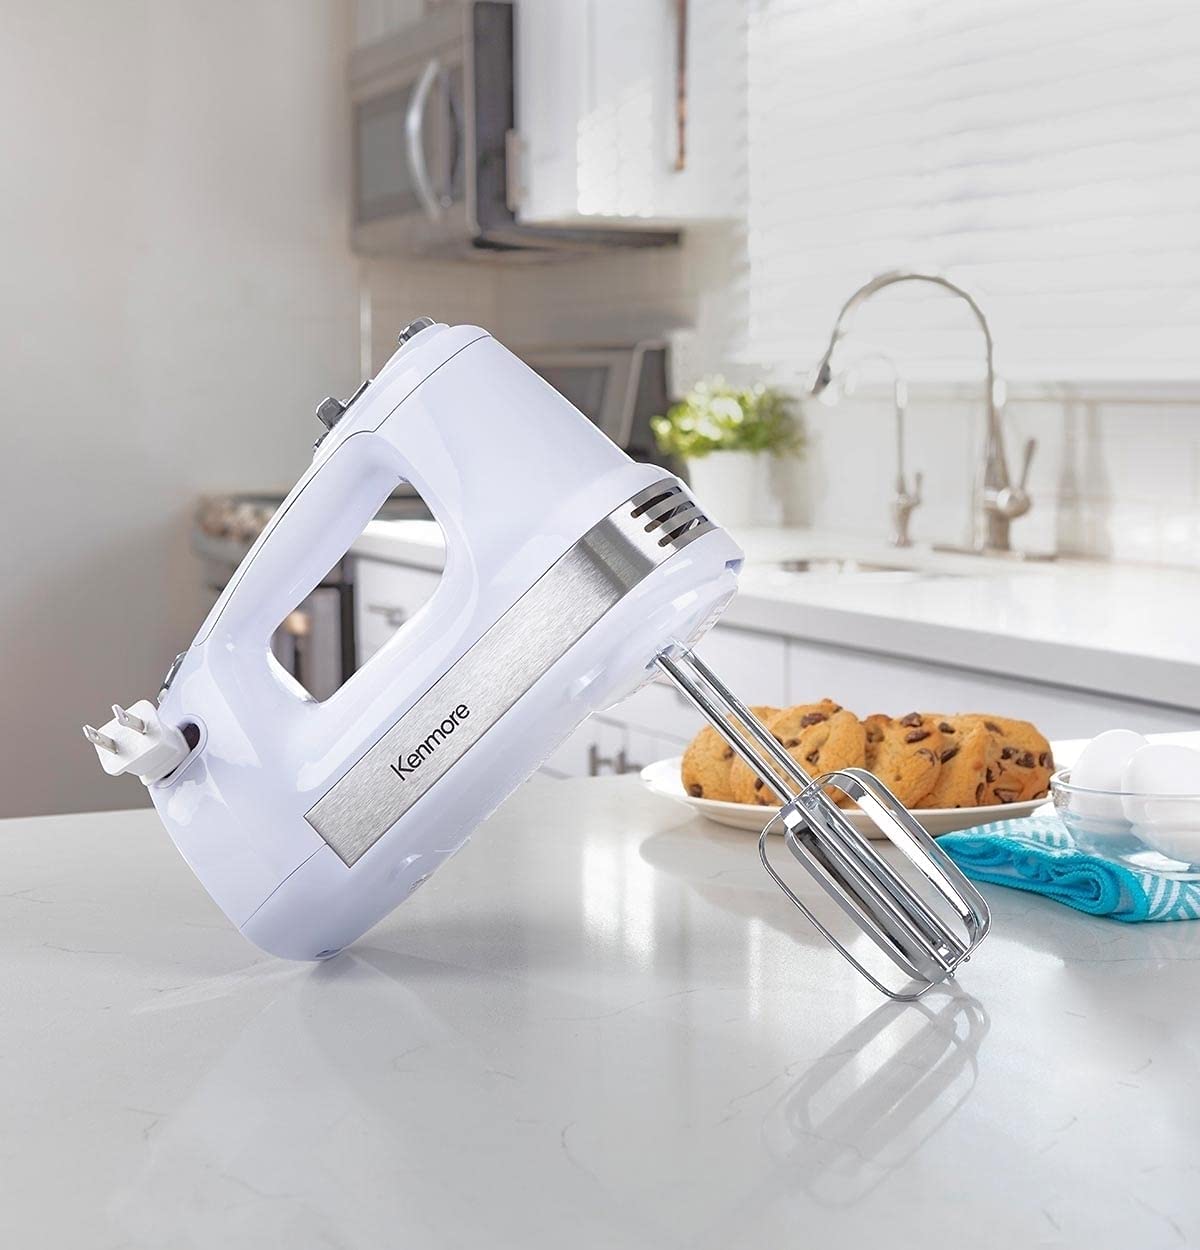 https://bigbigmart.com/wp-content/uploads/2022/07/Kenmore-5-Speed-Hand-Mixer-Beater-Blender-250-Watts-with-Beaters-Dough-Hooks-Liquid-Blending-Rod-Automatic-Cord-Retract-Burst-Control-and-Clip-On-Accessory-Storage1.jpg